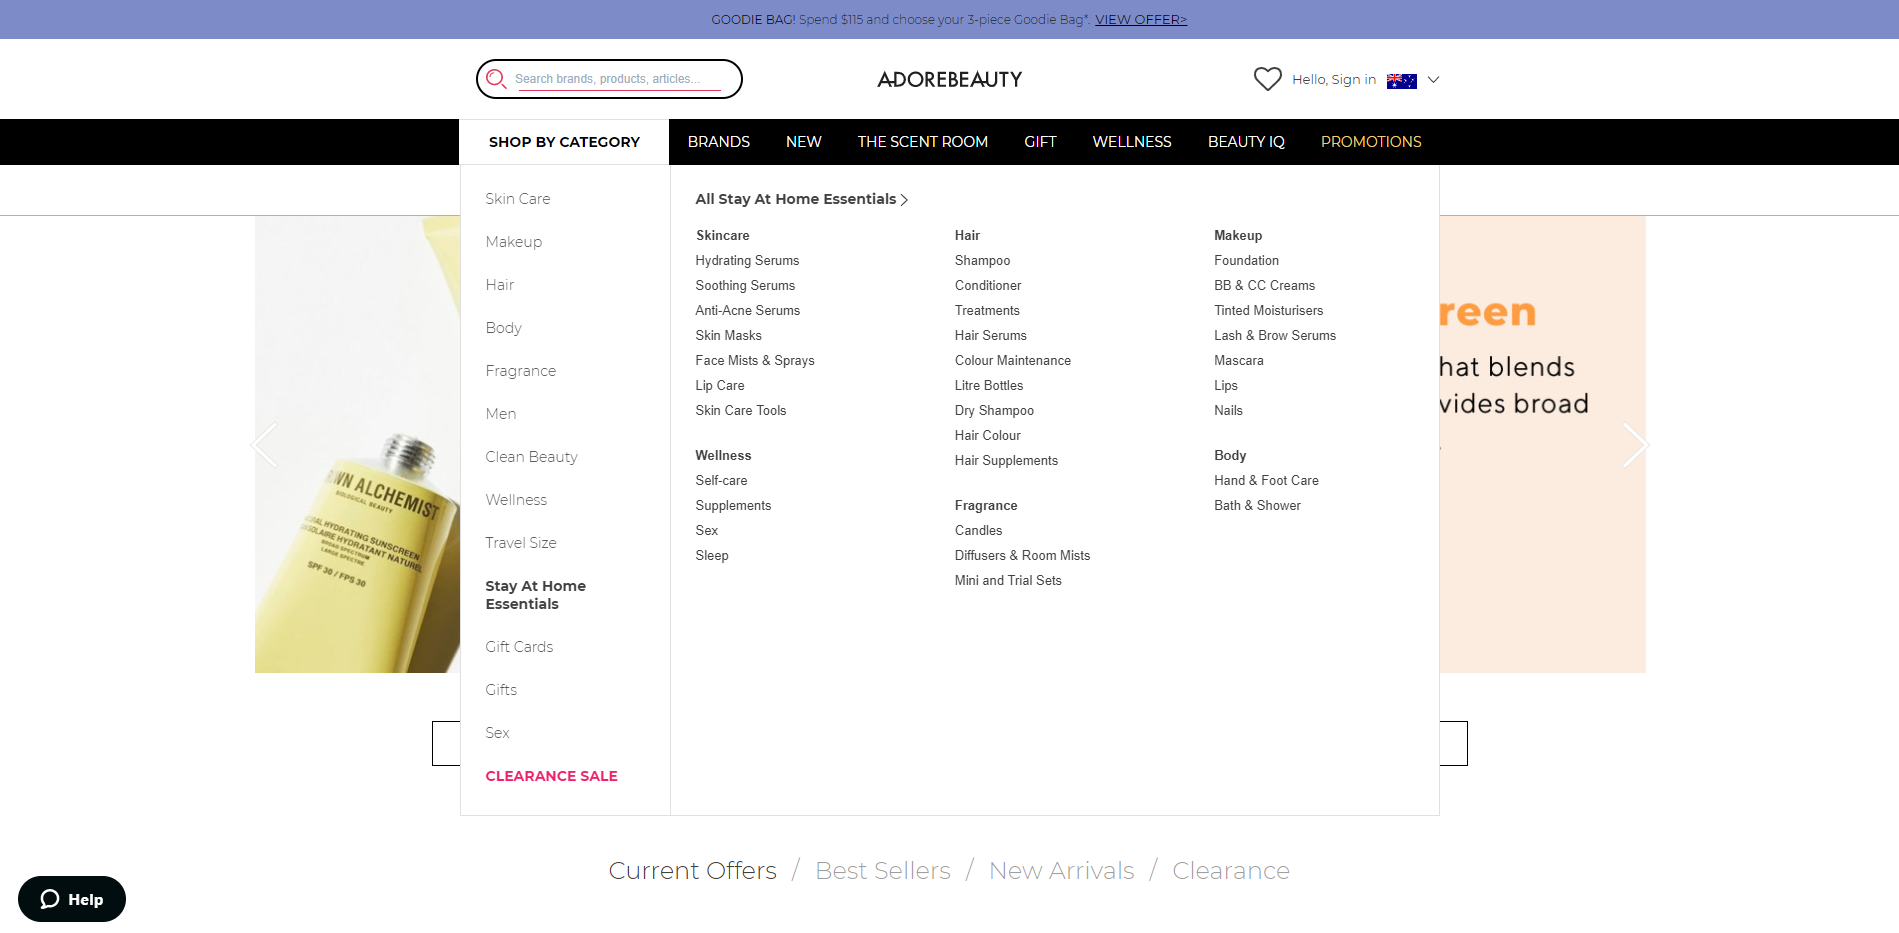 Adore Beauty website categories. Help customers find what they're looking for.